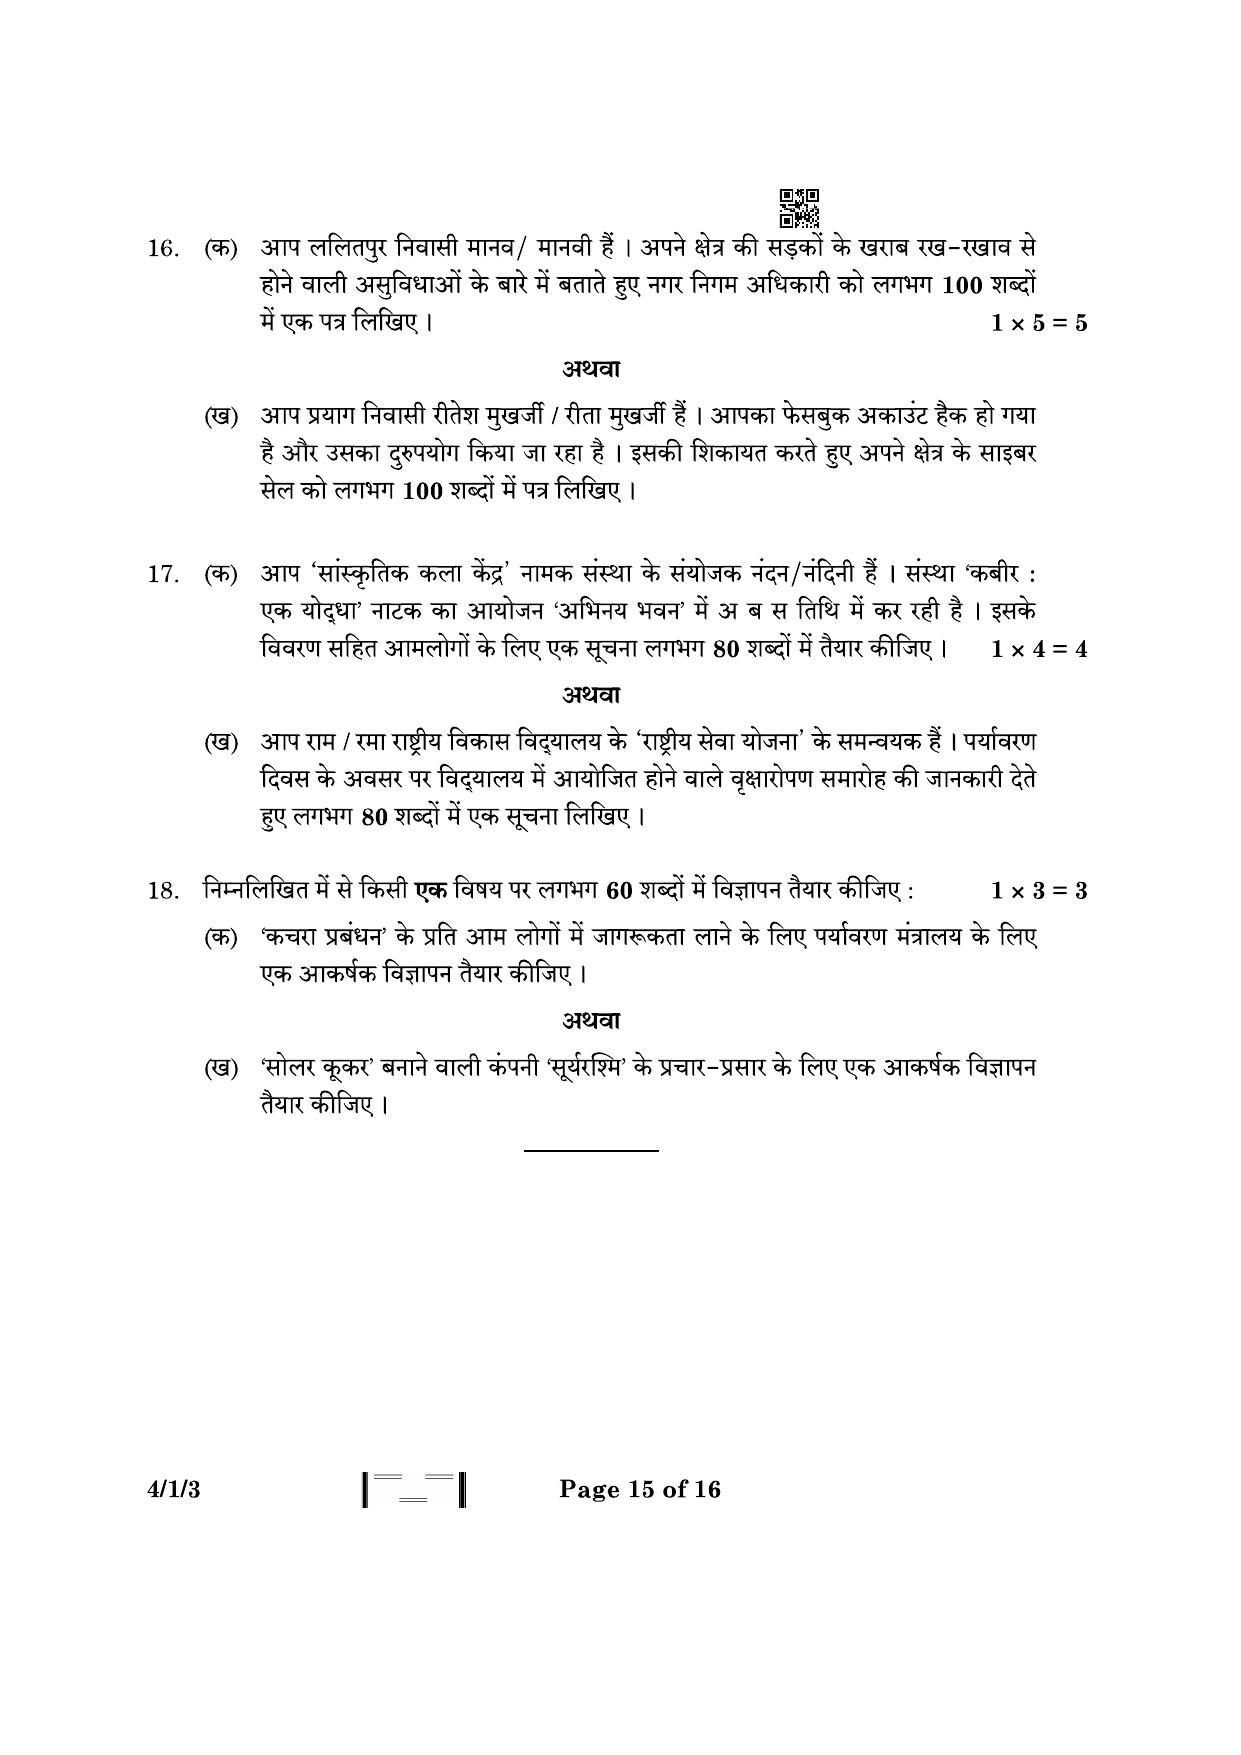 CBSE Class 10 4-1-3 Hindi B 2023 Question Paper - Page 15